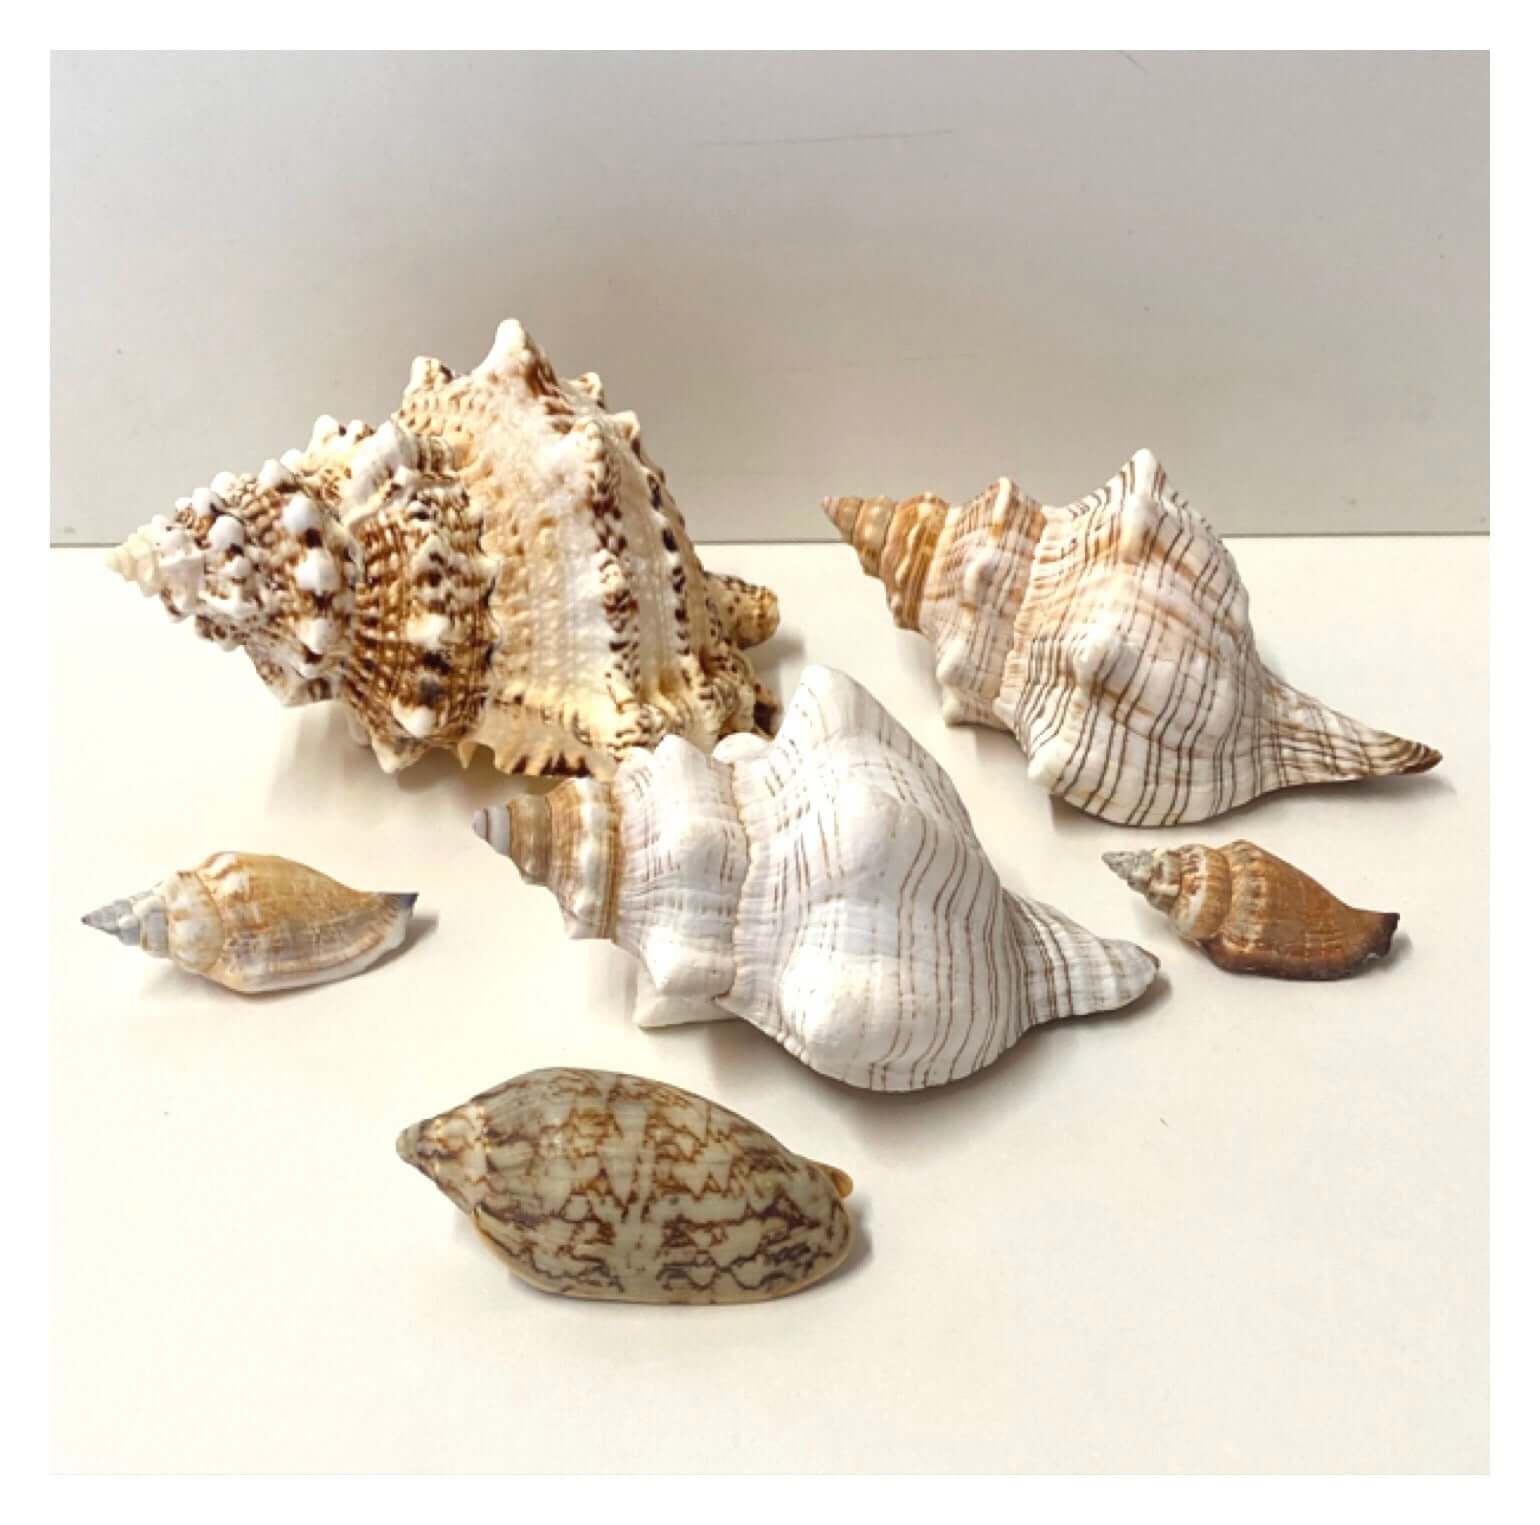 Beach Shell Collection F - The Renmy Store Homewares & Gifts 